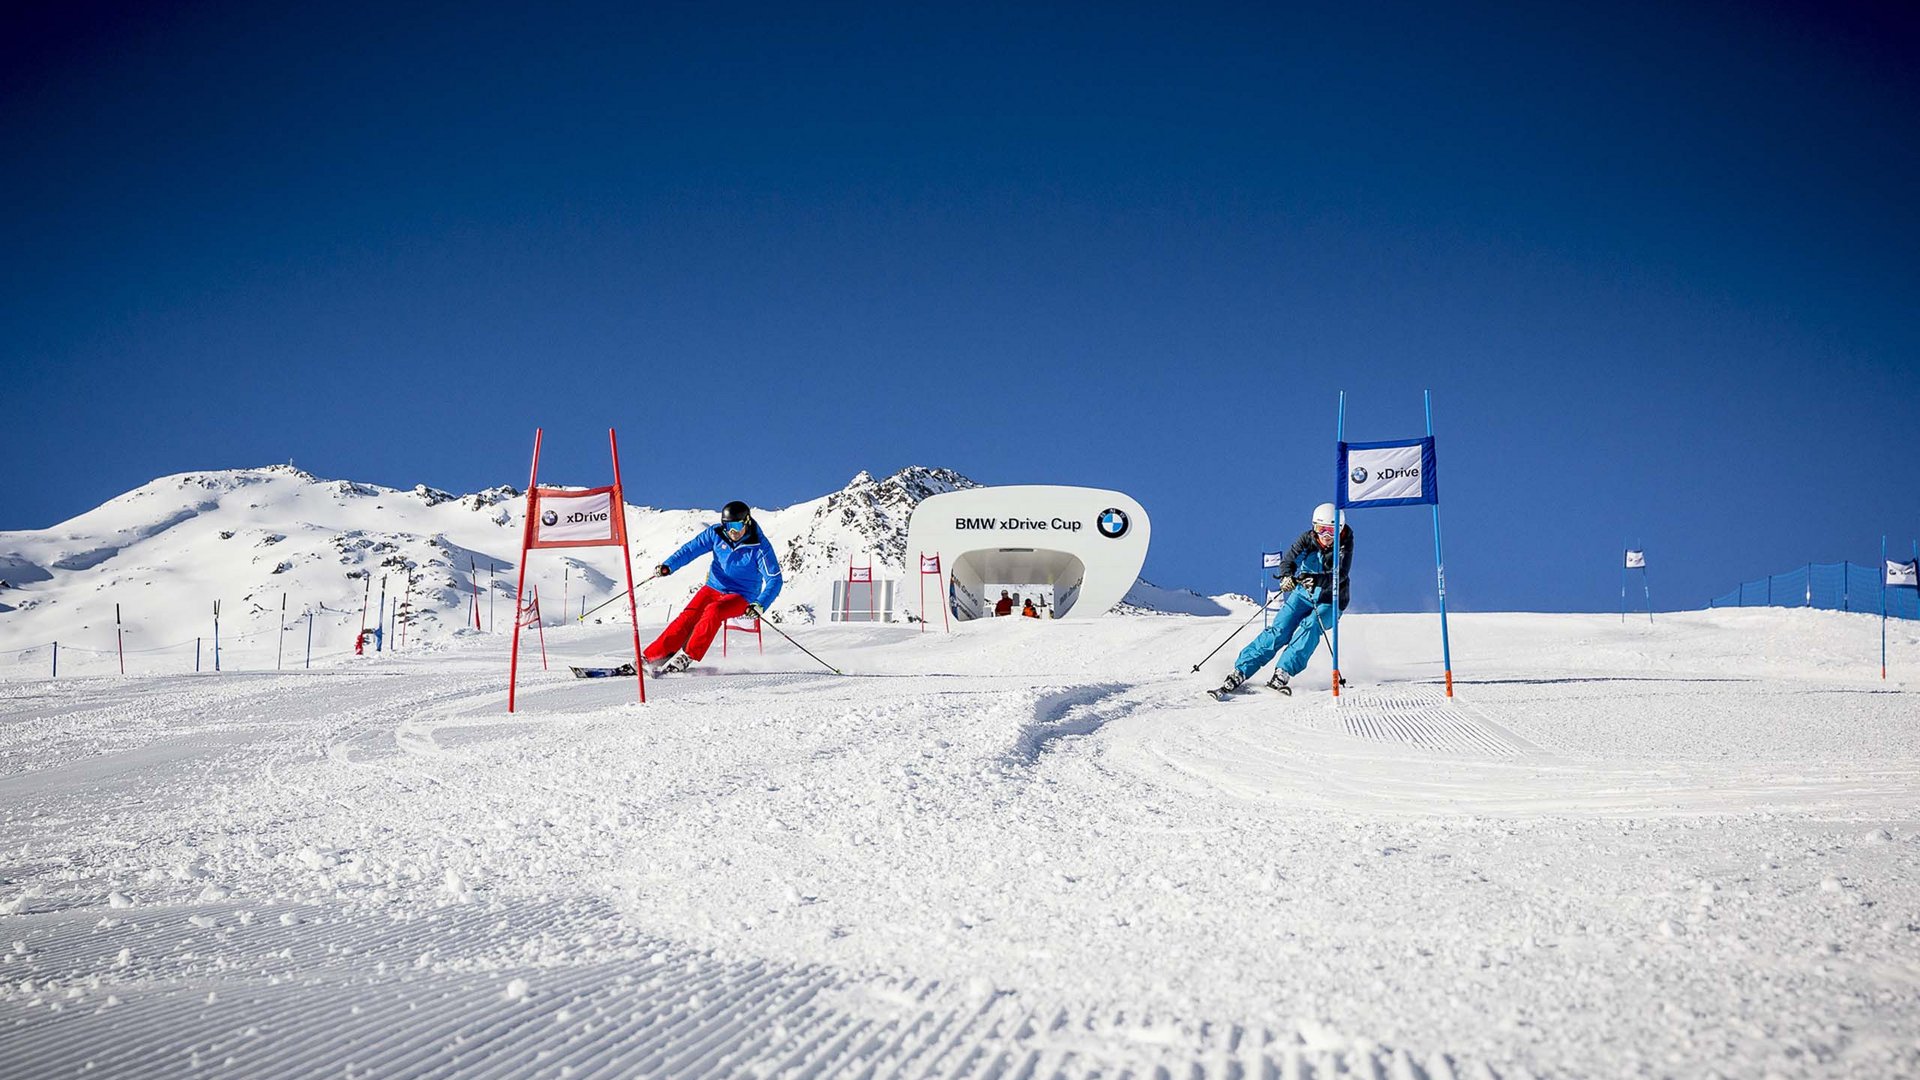 Sölden: offers with so many advantages